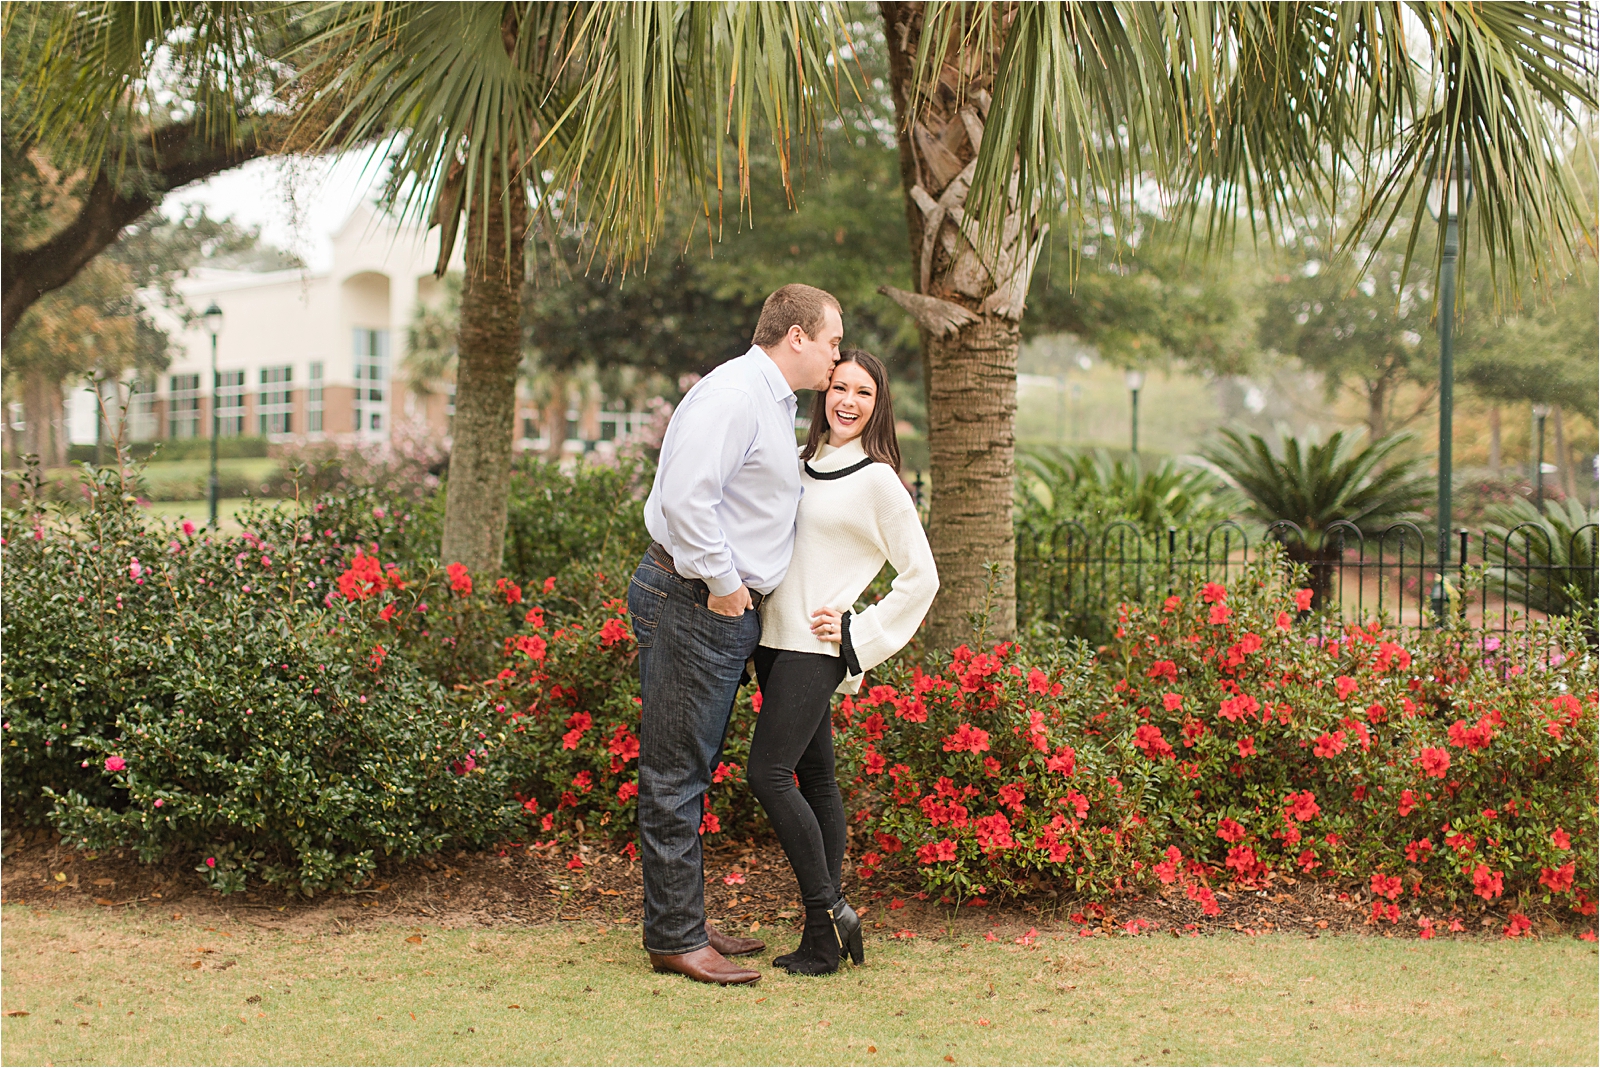 Autumn Engagement Session in the Rain | Courtney + Ben